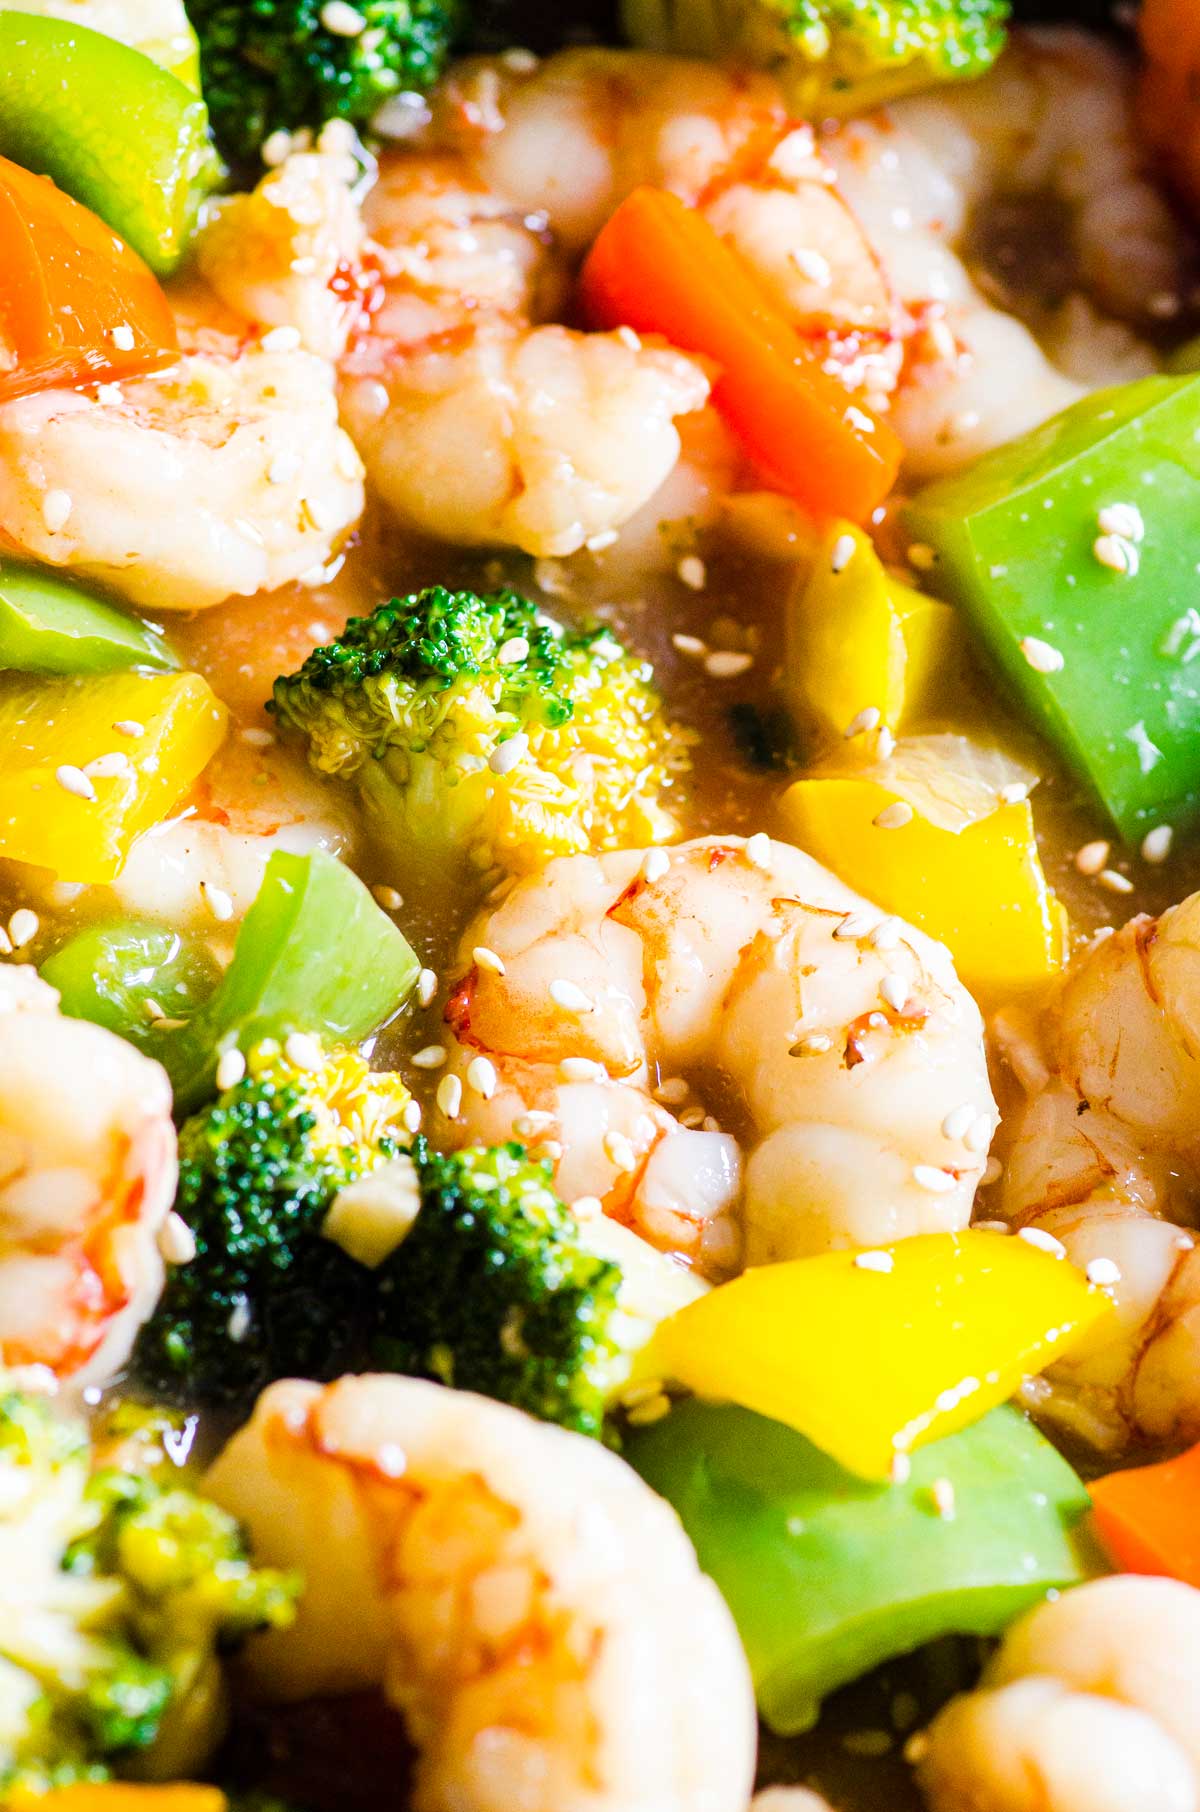 shrimp with broccoli and bell peppers in a sauce sprinkled with sesame seeds